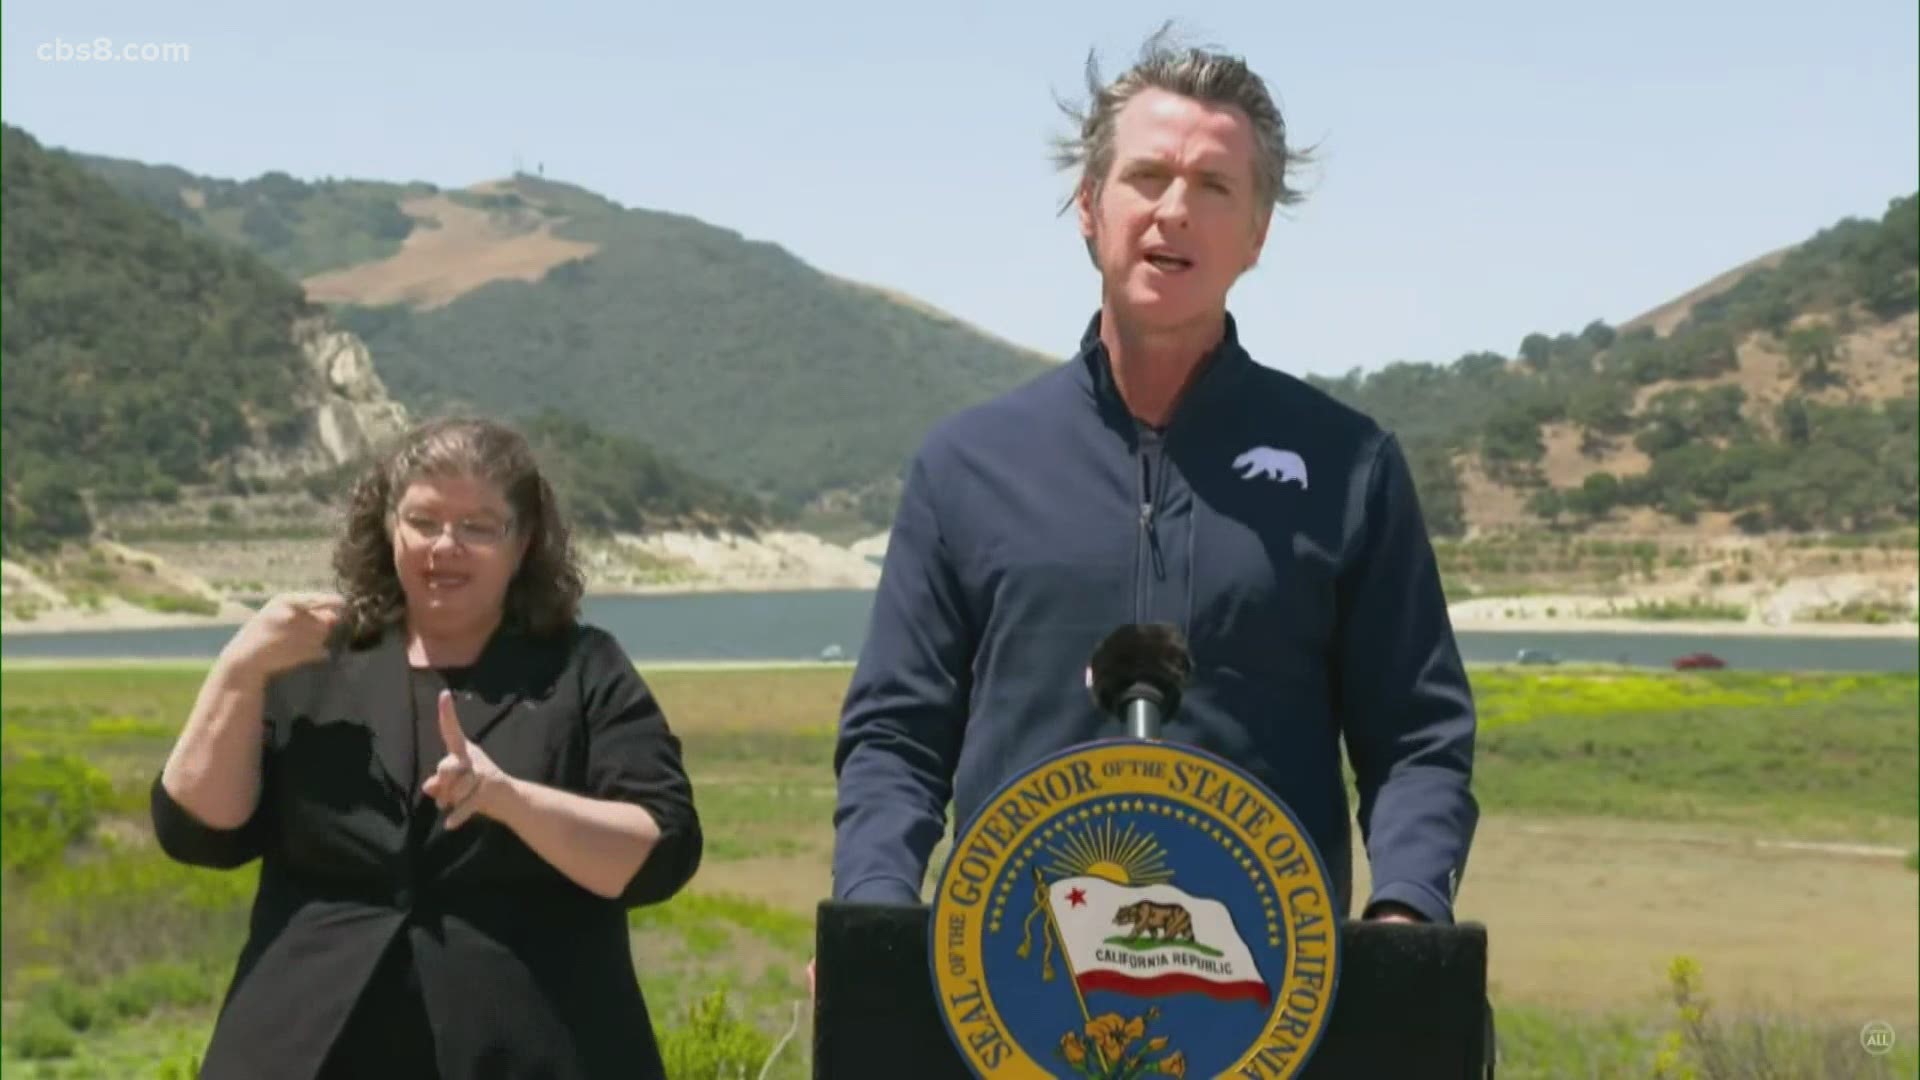 Amid deepening drought and record-breaking temperatures across the West, Gov. Newsom discusses the state's preparations for a potential third dry year.